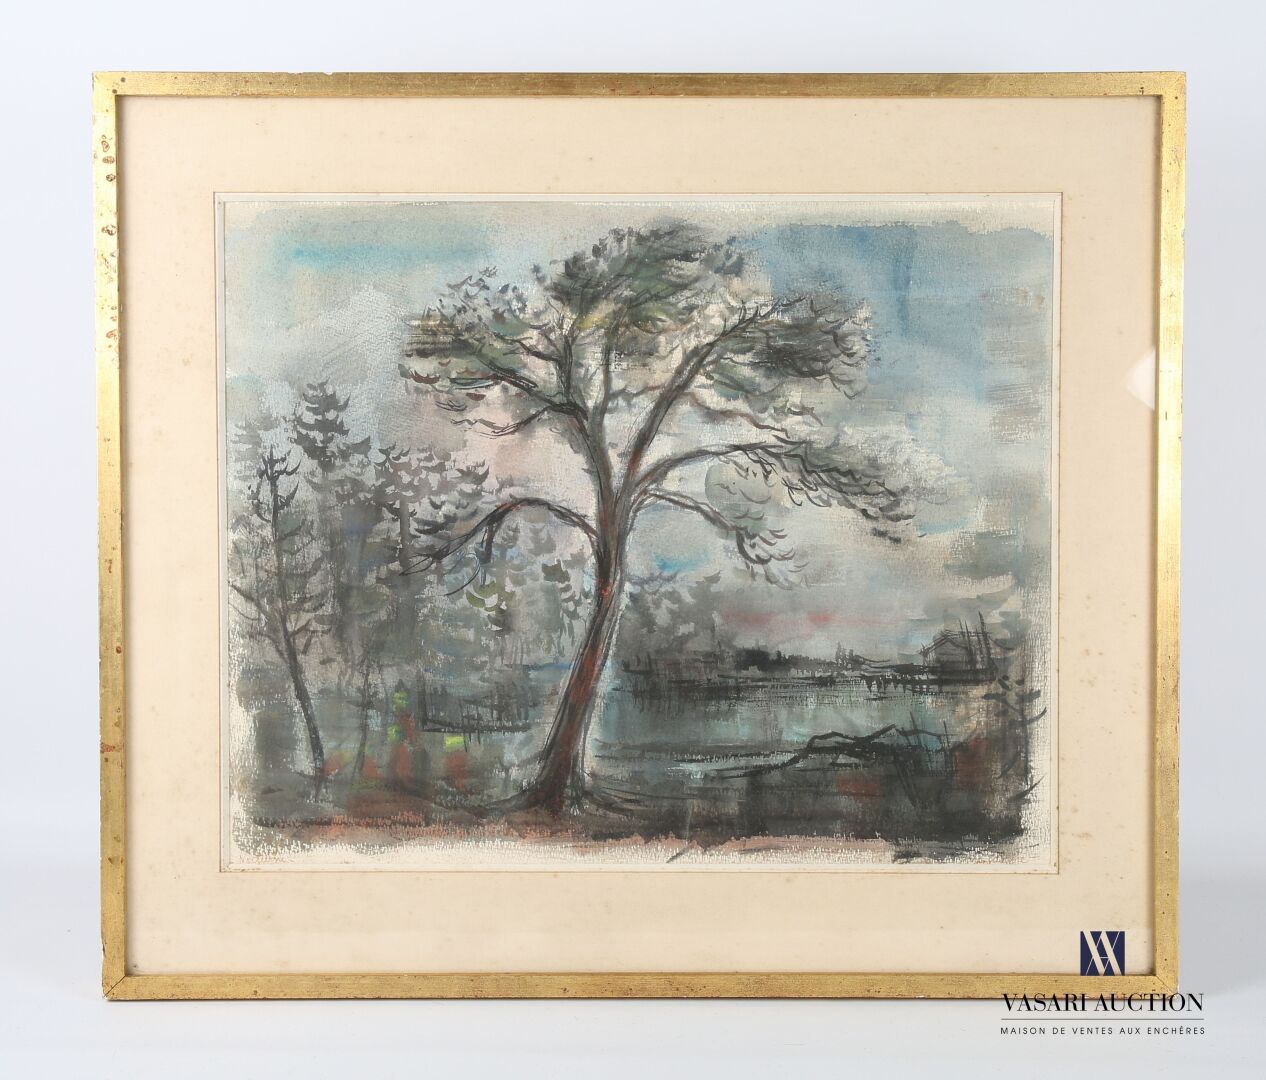 Null CARRERE Jean Gérard (born in 1922)
Nocturne
Watercolor on paper
Signed lowe&hellip;